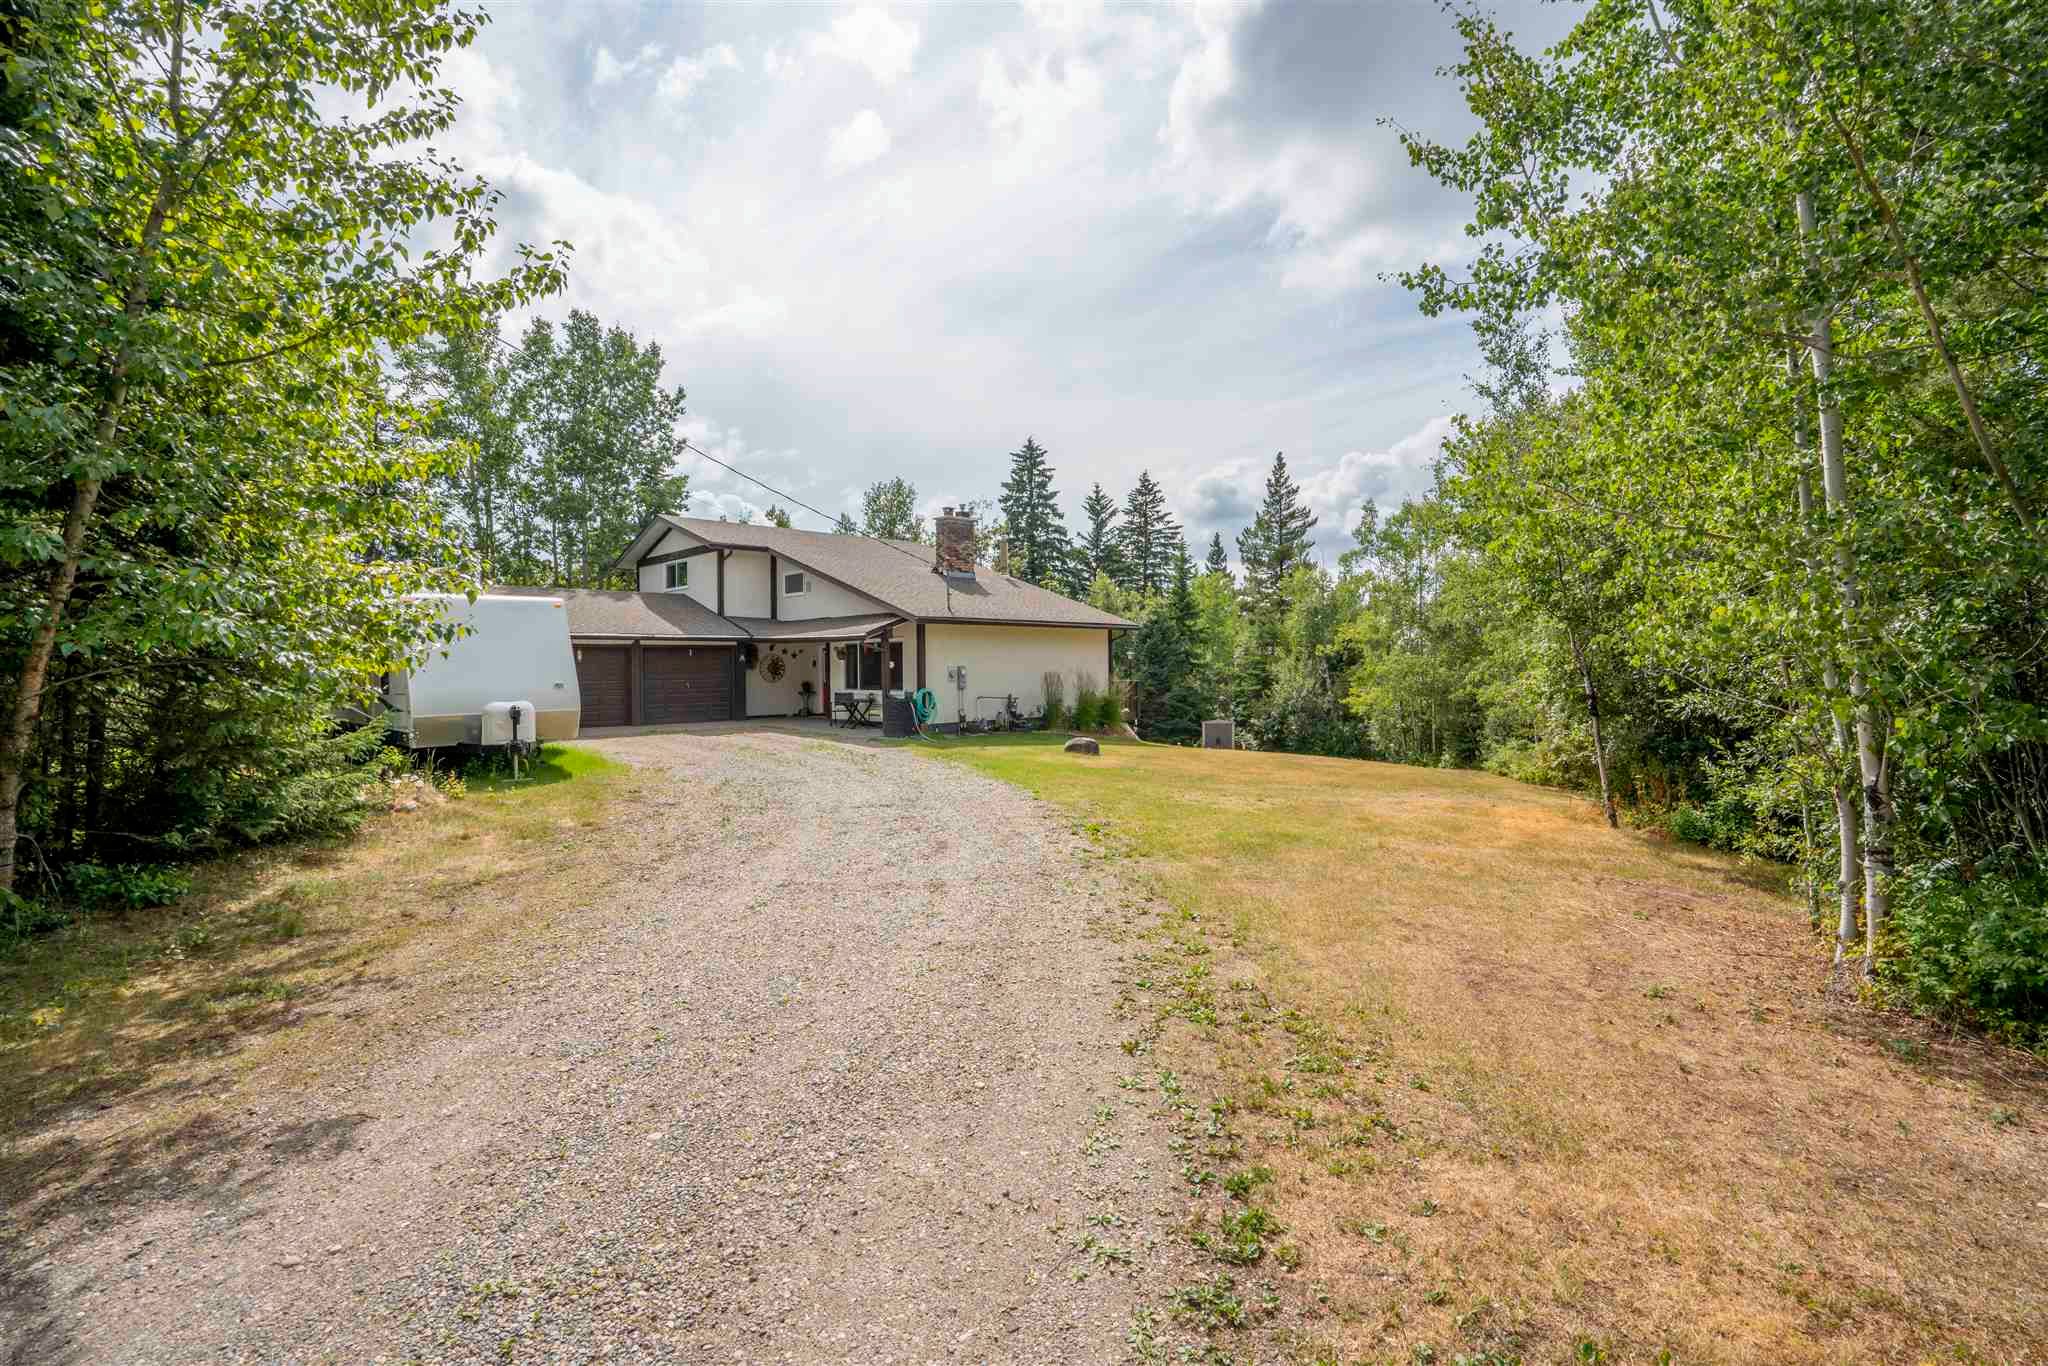 Main Photo: 9695 HEIGHTS Road in Prince George: Beaverley House for sale (PG Rural West (Zone 77))  : MLS®# R2602975